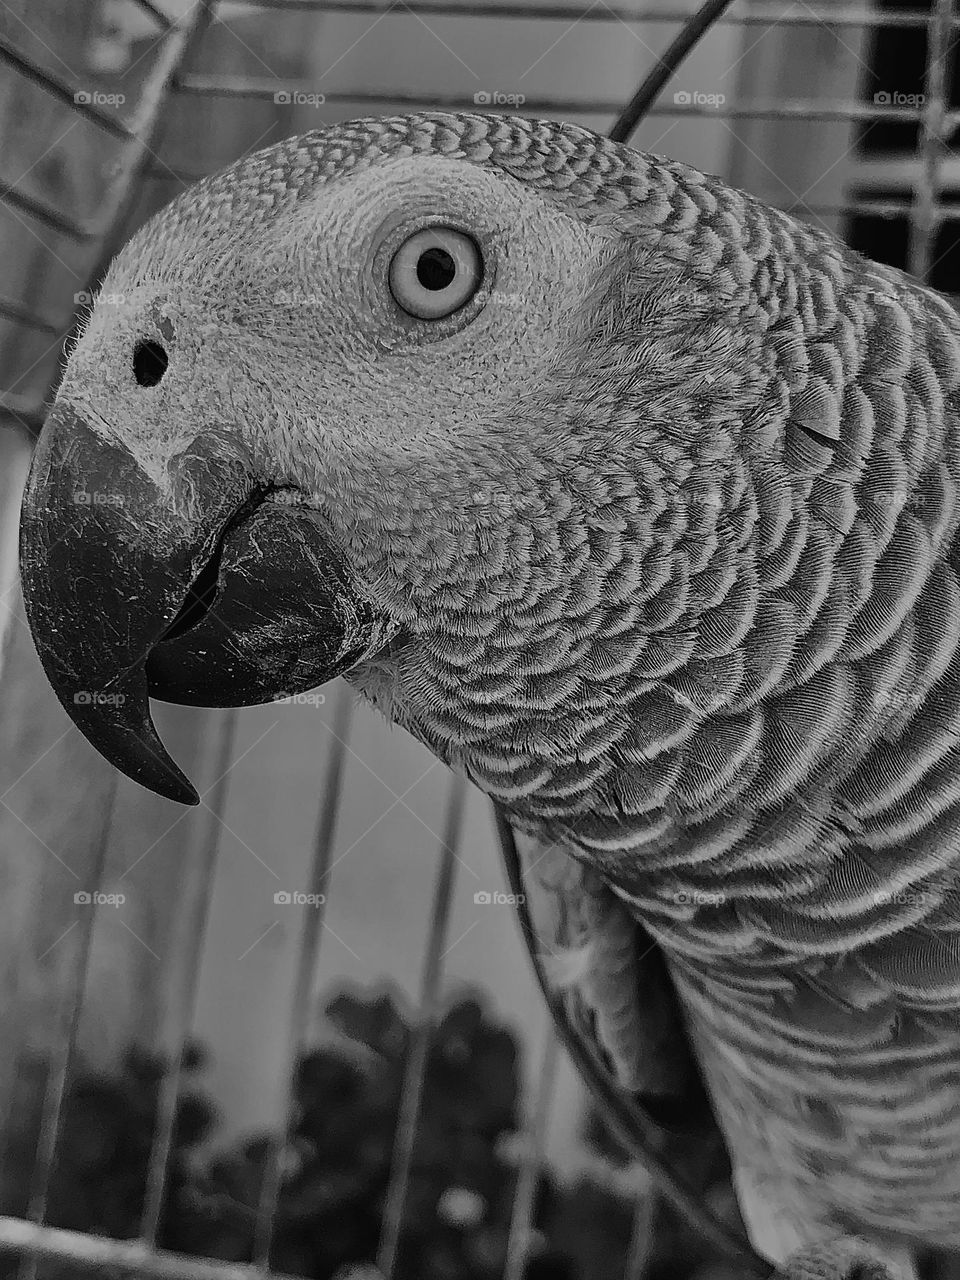 A close up black and white parrot portrait with facial details showing 